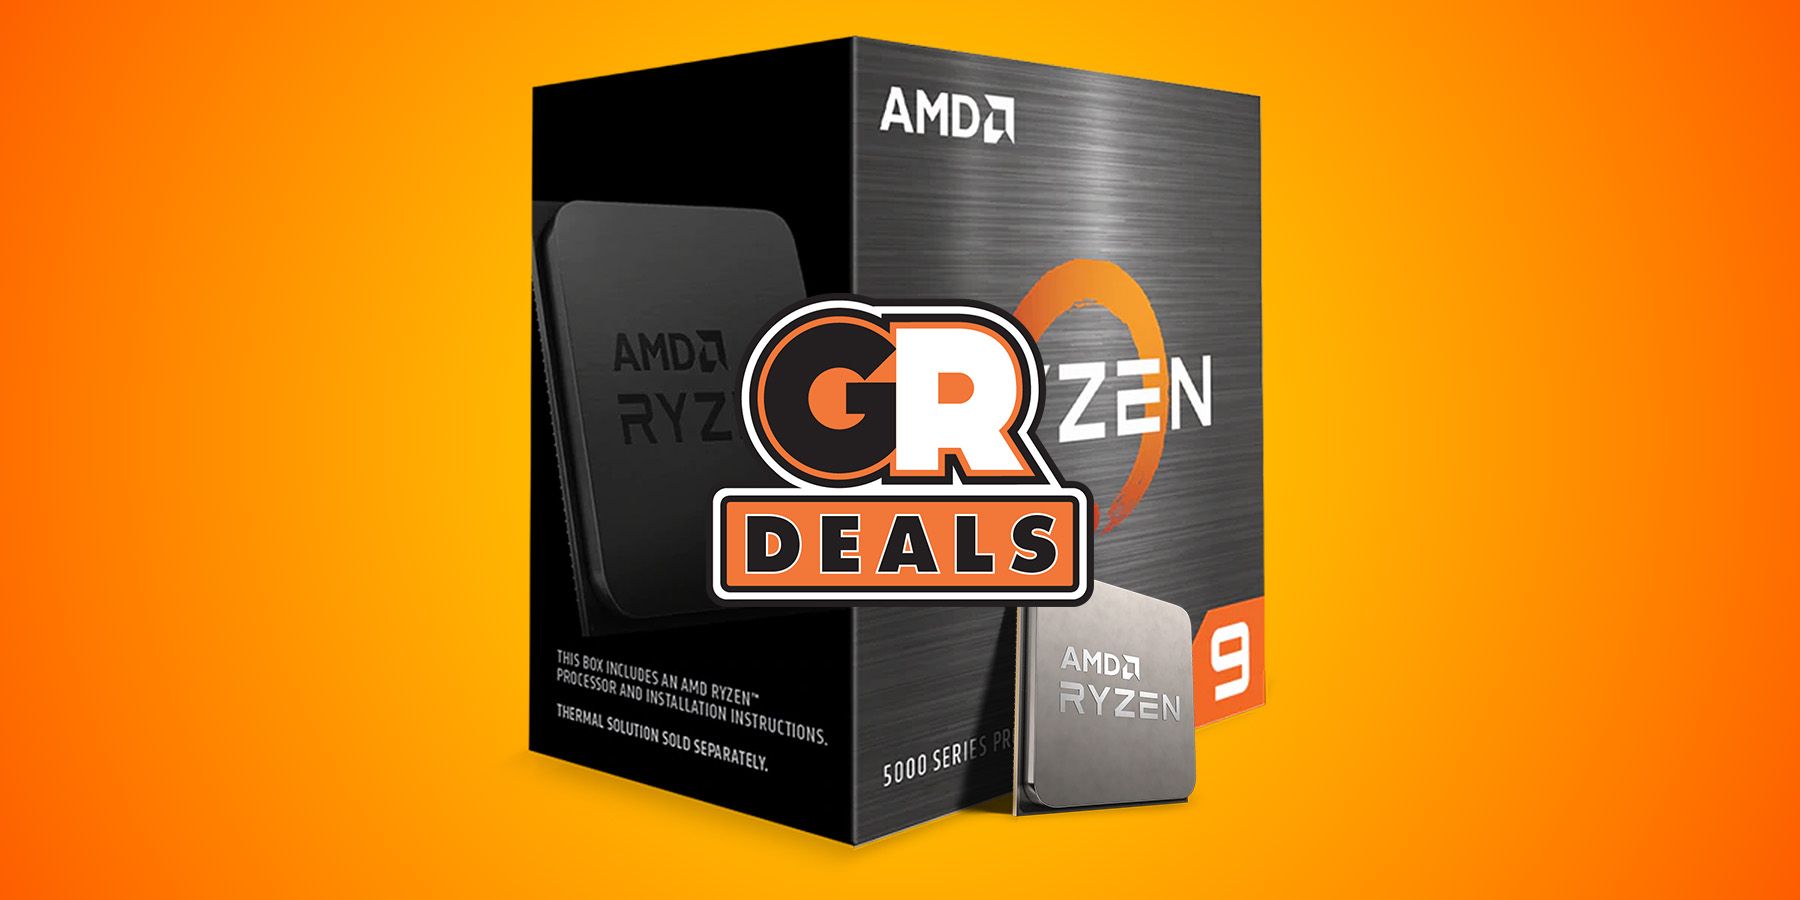 Save Over $200 on an AMD Ryzen 9 5900X CPU For a Limited Time